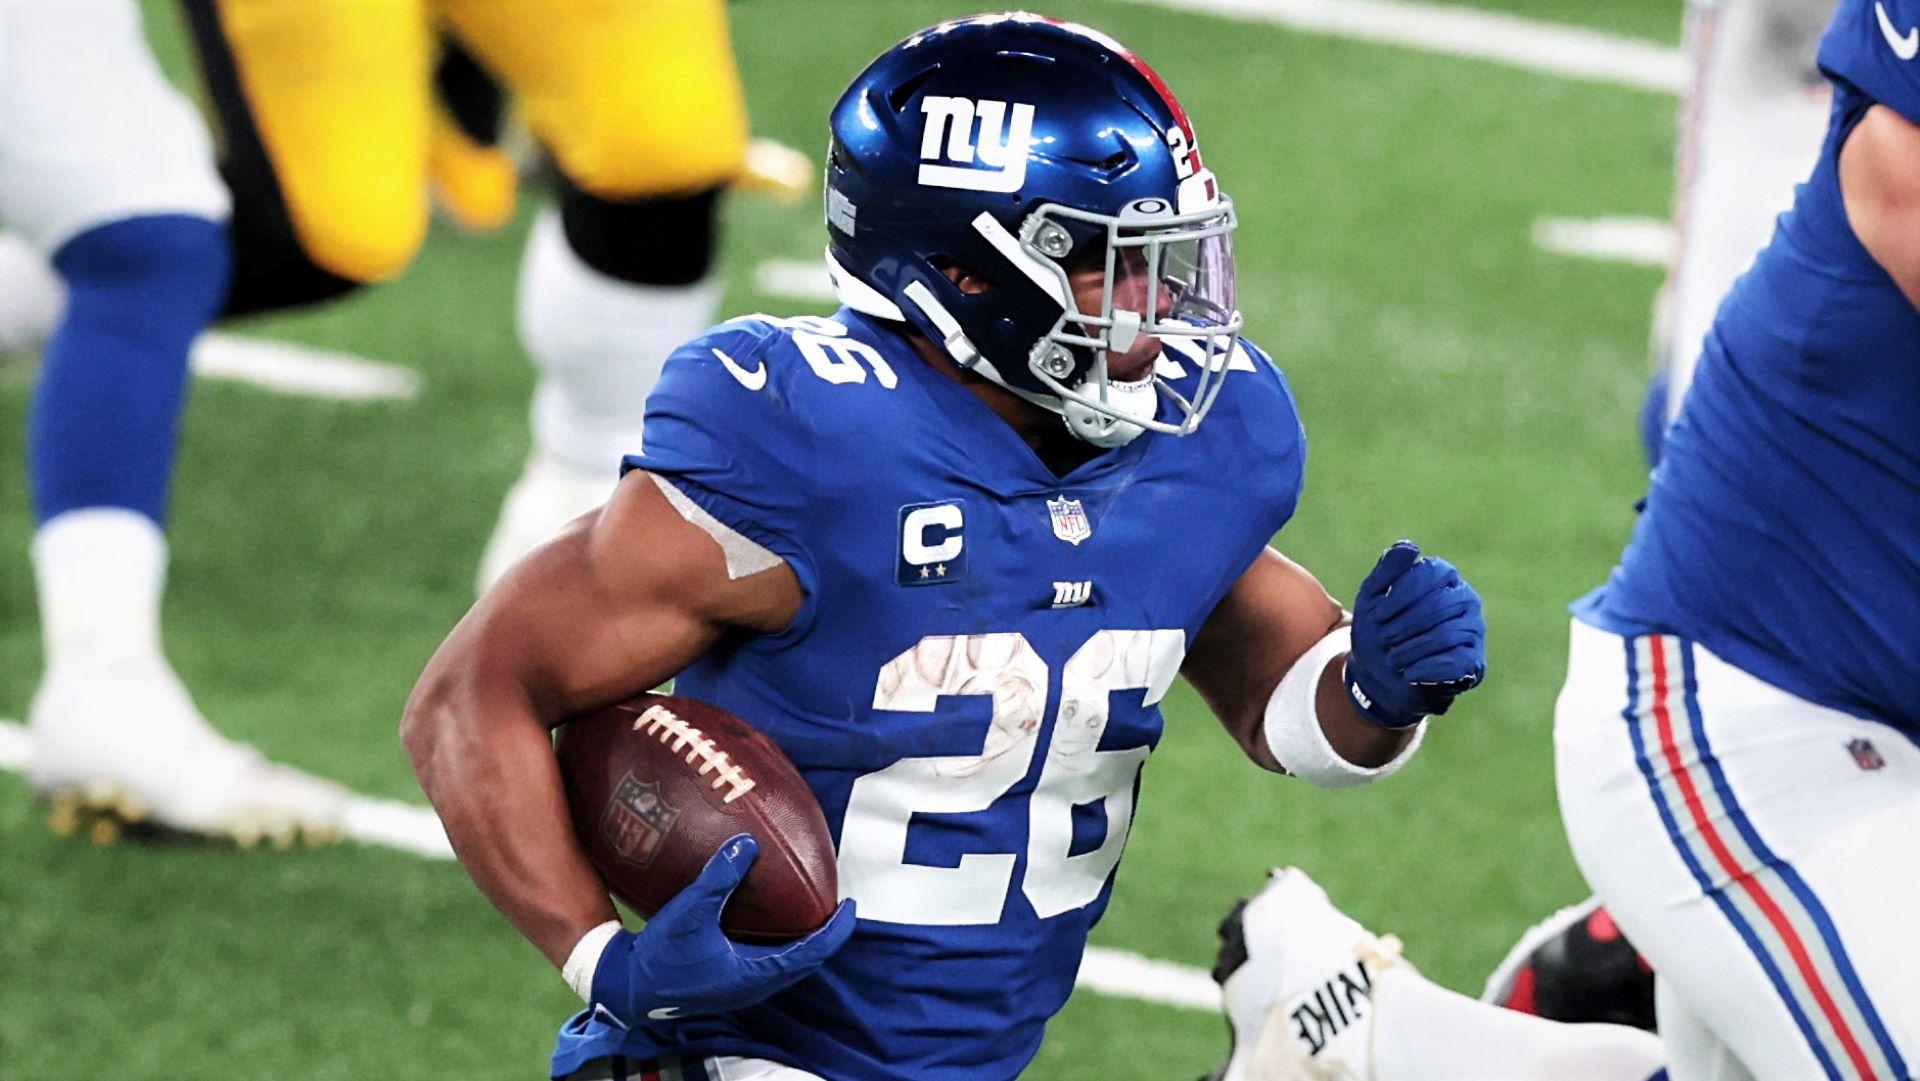 Sep 14, 2020; East Rutherford, New Jersey, USA; New York Giants running back Saquon Barkley (26) carries the ball against the Pittsburgh Steelers as offensive guard Kevin Zeitler (70) blocks during the second half at MetLife Stadium. Mandatory Credit: Vincent Carchietta-USA TODAY Sports / © Vincent Carchietta-USA TODAY Sports